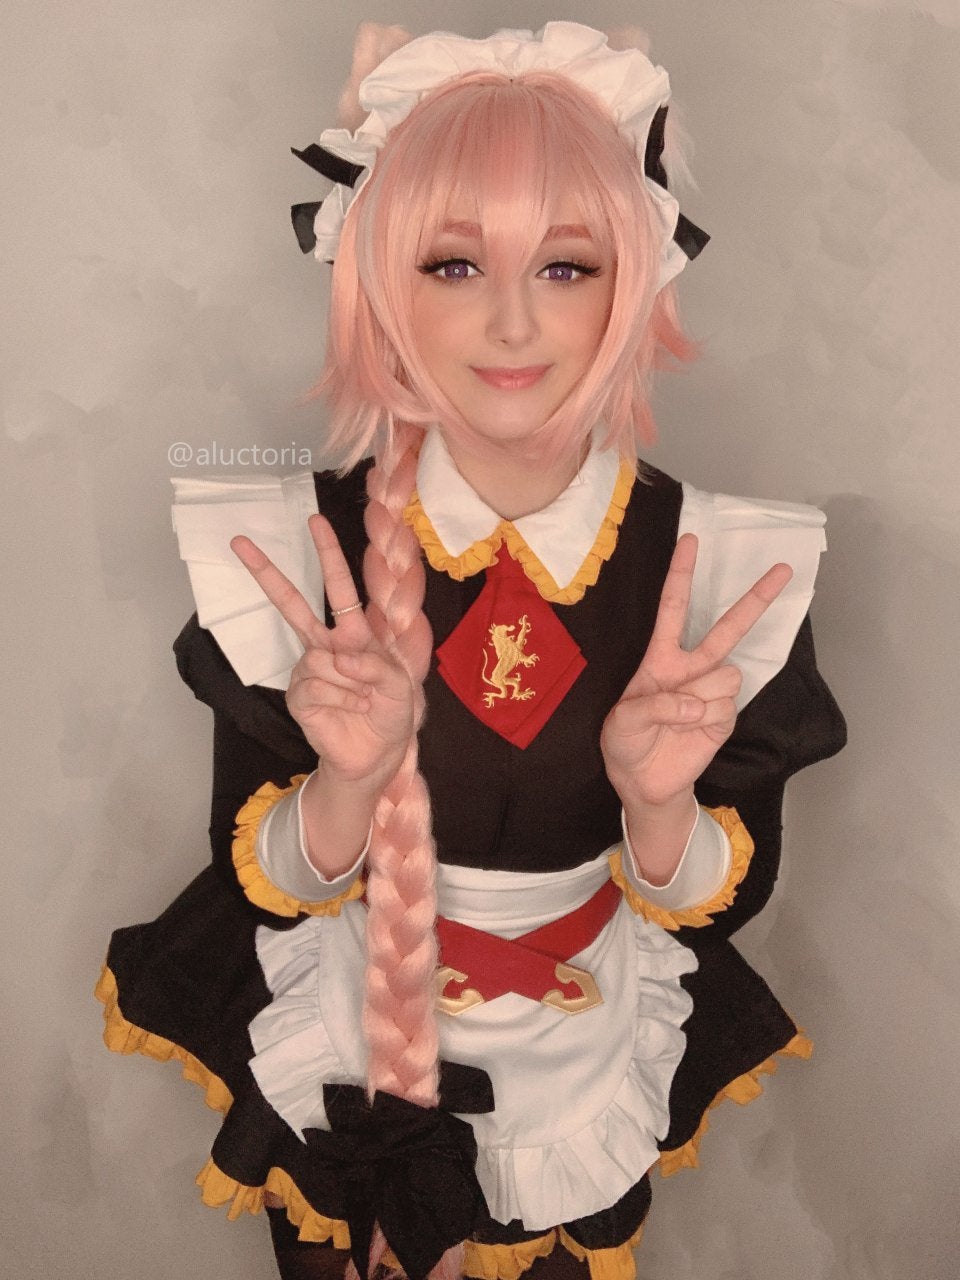 Astolfo Cosplay By Aluctori